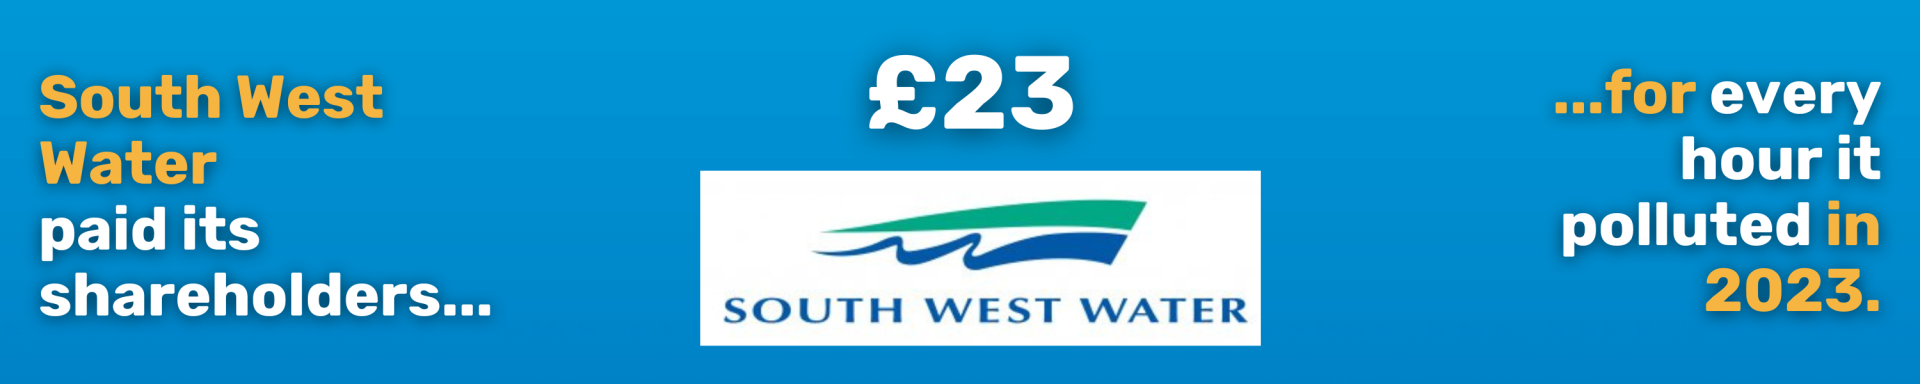 Text reads: "South West Water paid its shareholders £23 for every hour it polluted in 2023."